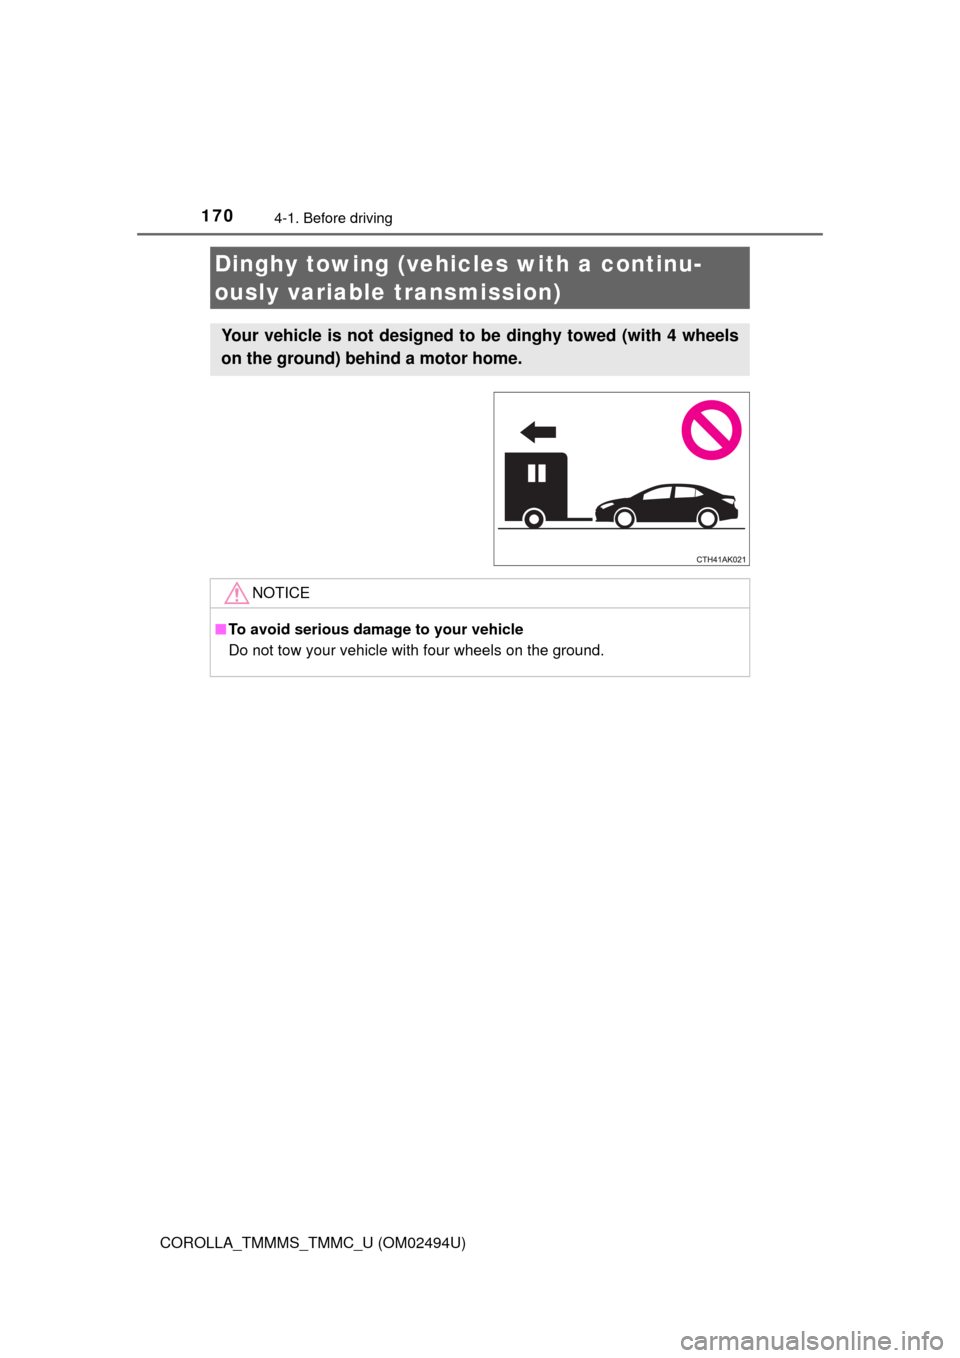 TOYOTA COROLLA 2017 11.G Owners Manual 1704-1. Before driving
COROLLA_TMMMS_TMMC_U (OM02494U)
Dinghy towing (vehicles with a continu-
ously variable transmission)
Your vehicle is not designed to be dinghy towed (with 4 wheels
on the ground